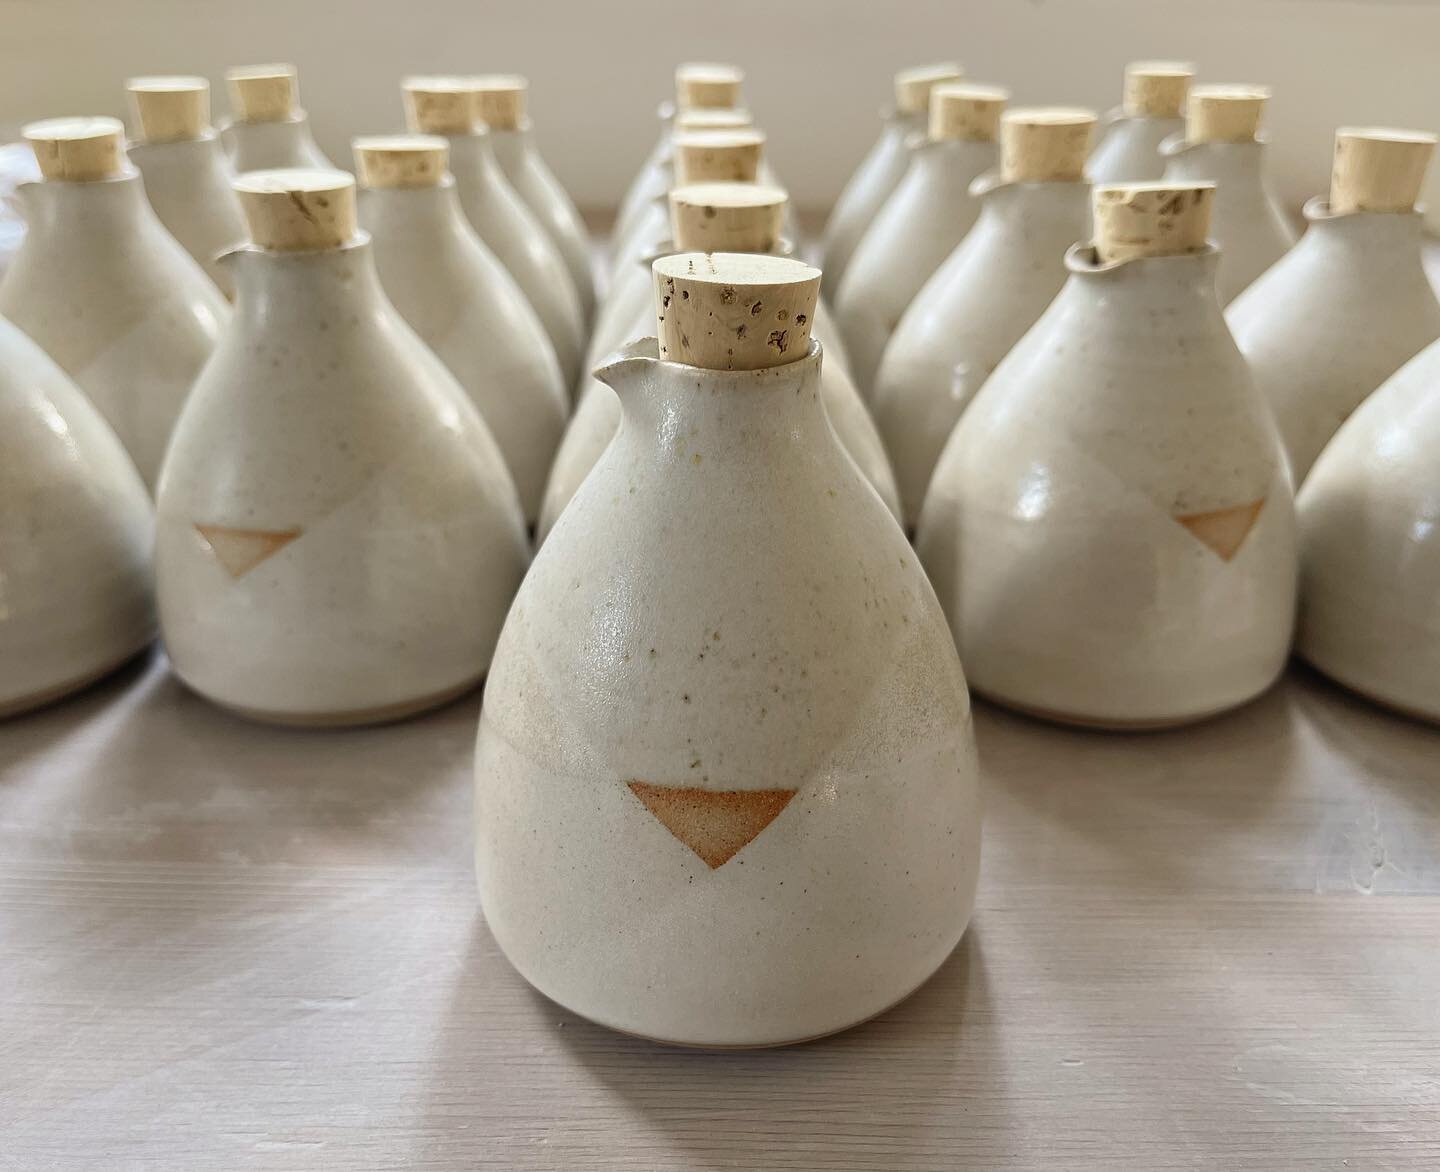 Oil jugs, new &amp; exclusive to @toast 

(Available later this year 🎄)

#toastbeing #modernceramics #inthestudio 
#potterylife #womeninceramics #studiopottery #potterylove #rustichome #simpleandstill #craftsposure #craftsofinstagram #allthebeautifu